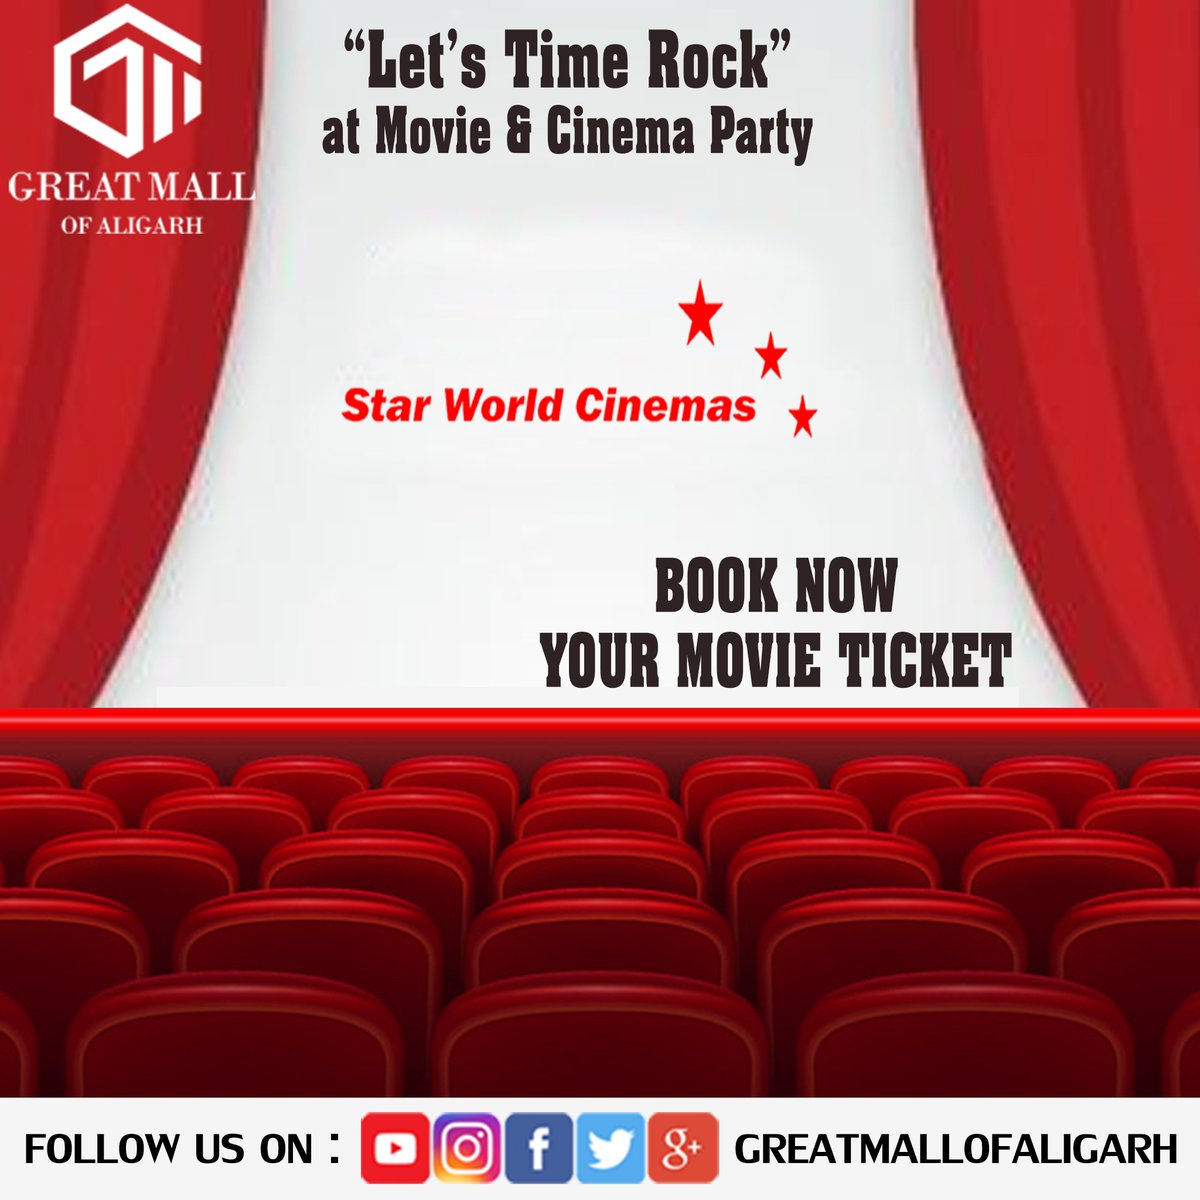 Enjoy your day with Star world Cinemas 
Book your movie ticket 
For details visit bookmyshow.com 
Book your seats now : - 
1) Book My Show :- bit.ly/bookmyshow_Ali… …

2) Paytm :- bit.ly/Paytm_Aligarh

#StarworldCinemas #Aligarh
#GREATMALLOFALIGARH